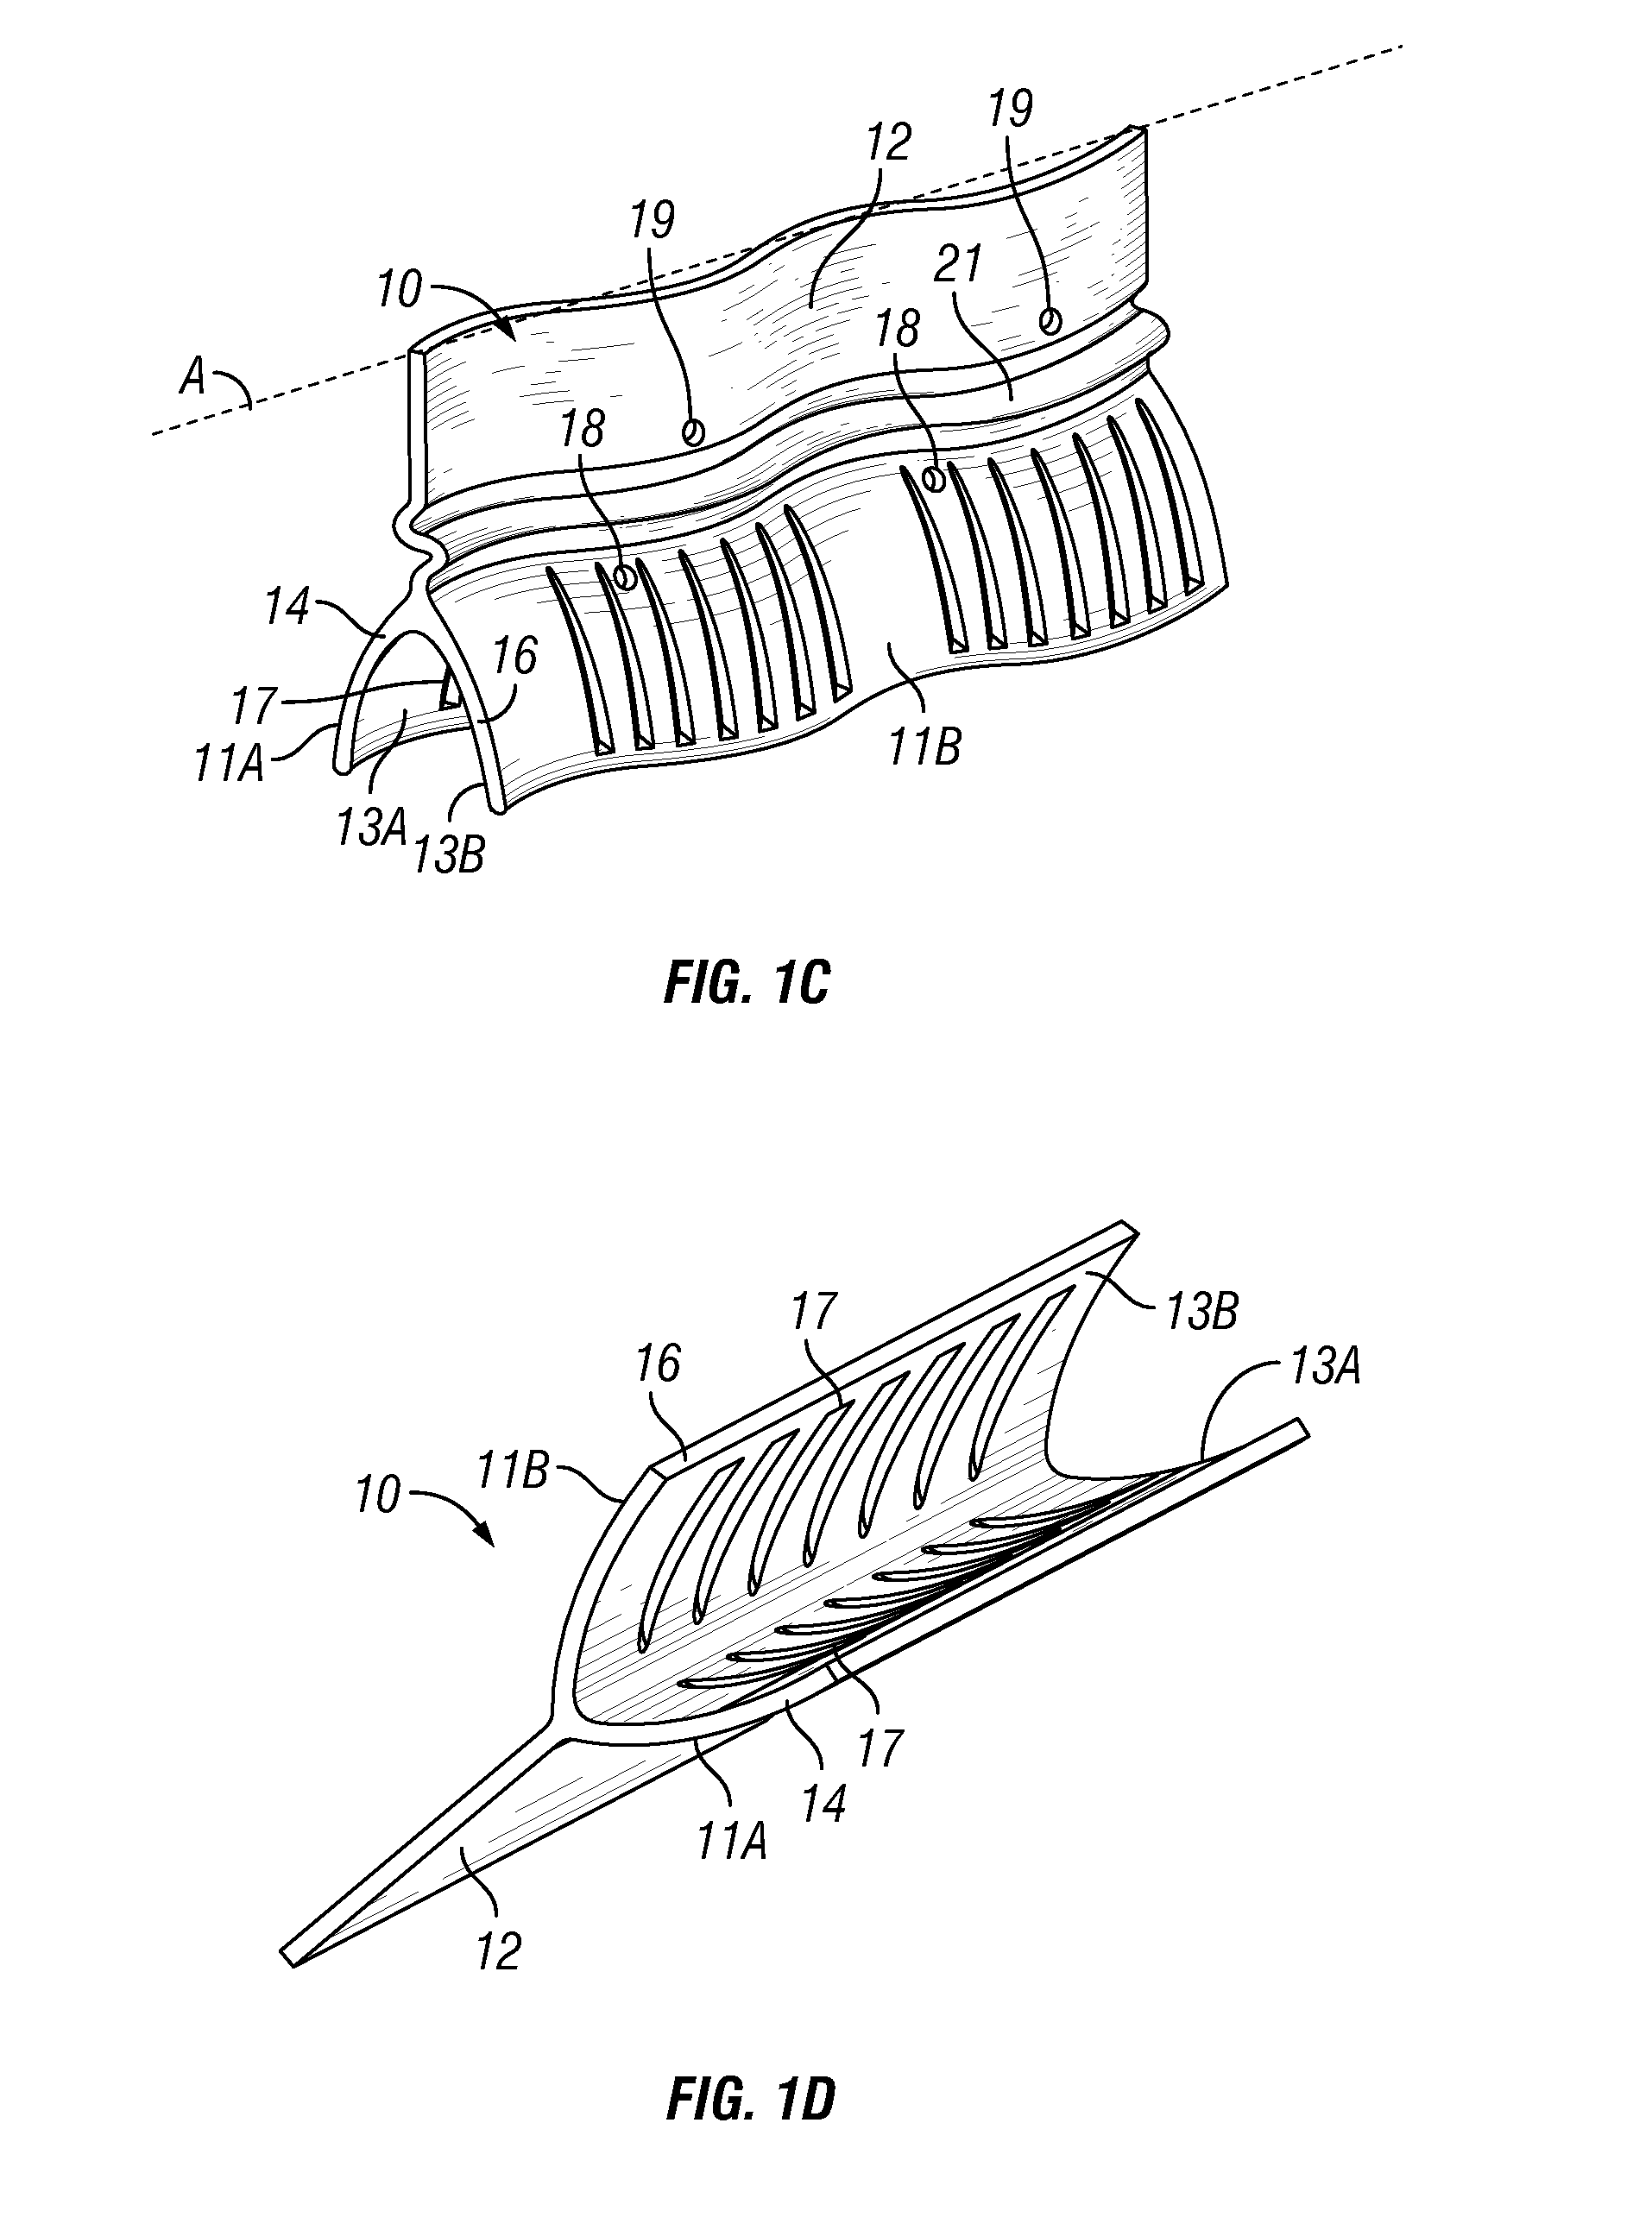 Progressive tire mold element with scallops and tire formed by the same